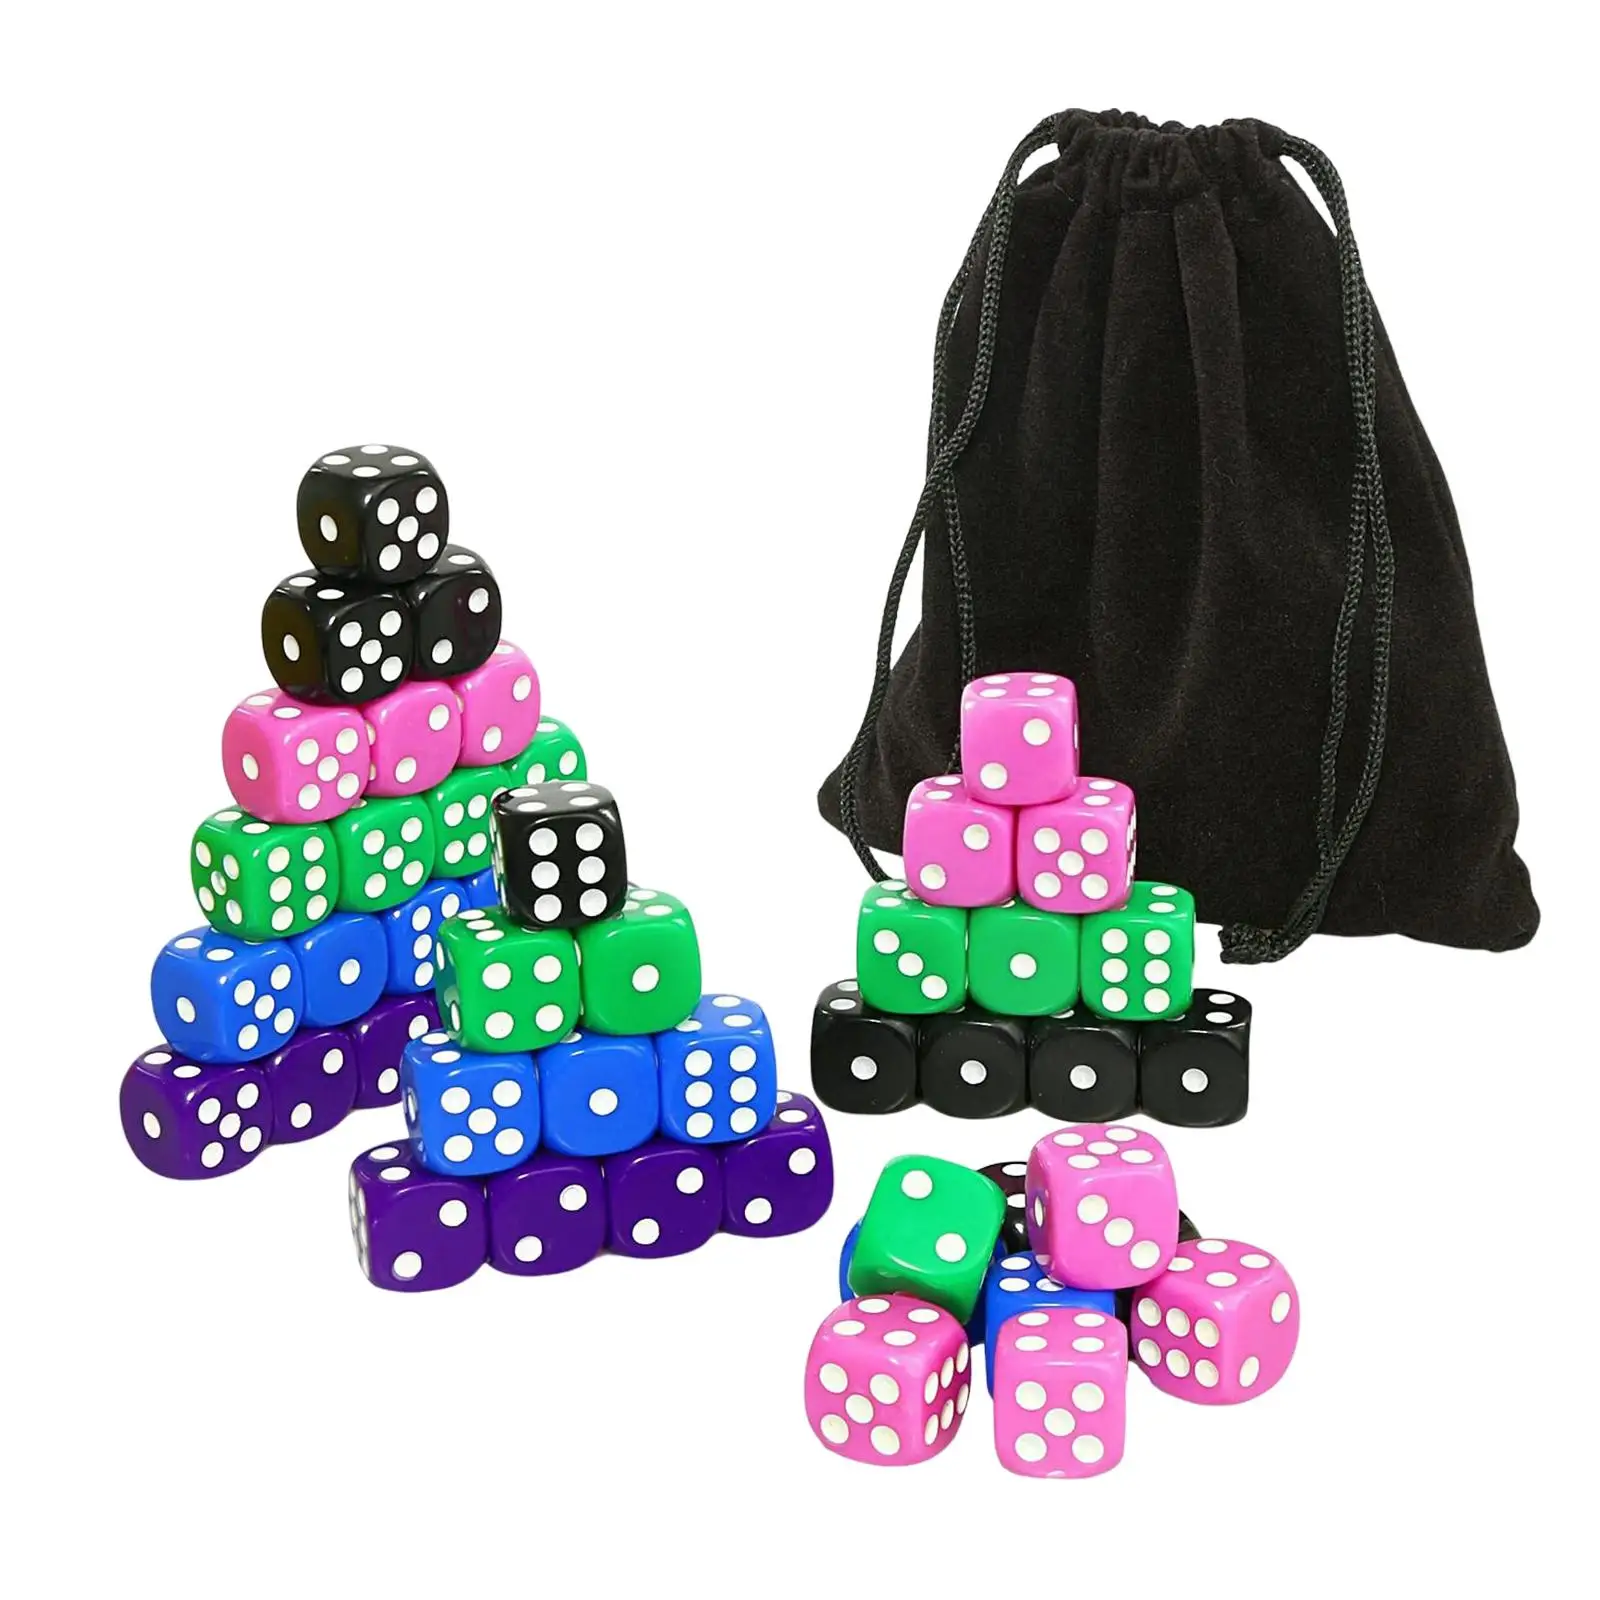 50 Pieces D6 6 Sided Dice Set with Velvet Pouch Bar Toys for MTG 16mm Acrylic Dice Board Game Math Teaching Role Playing Games